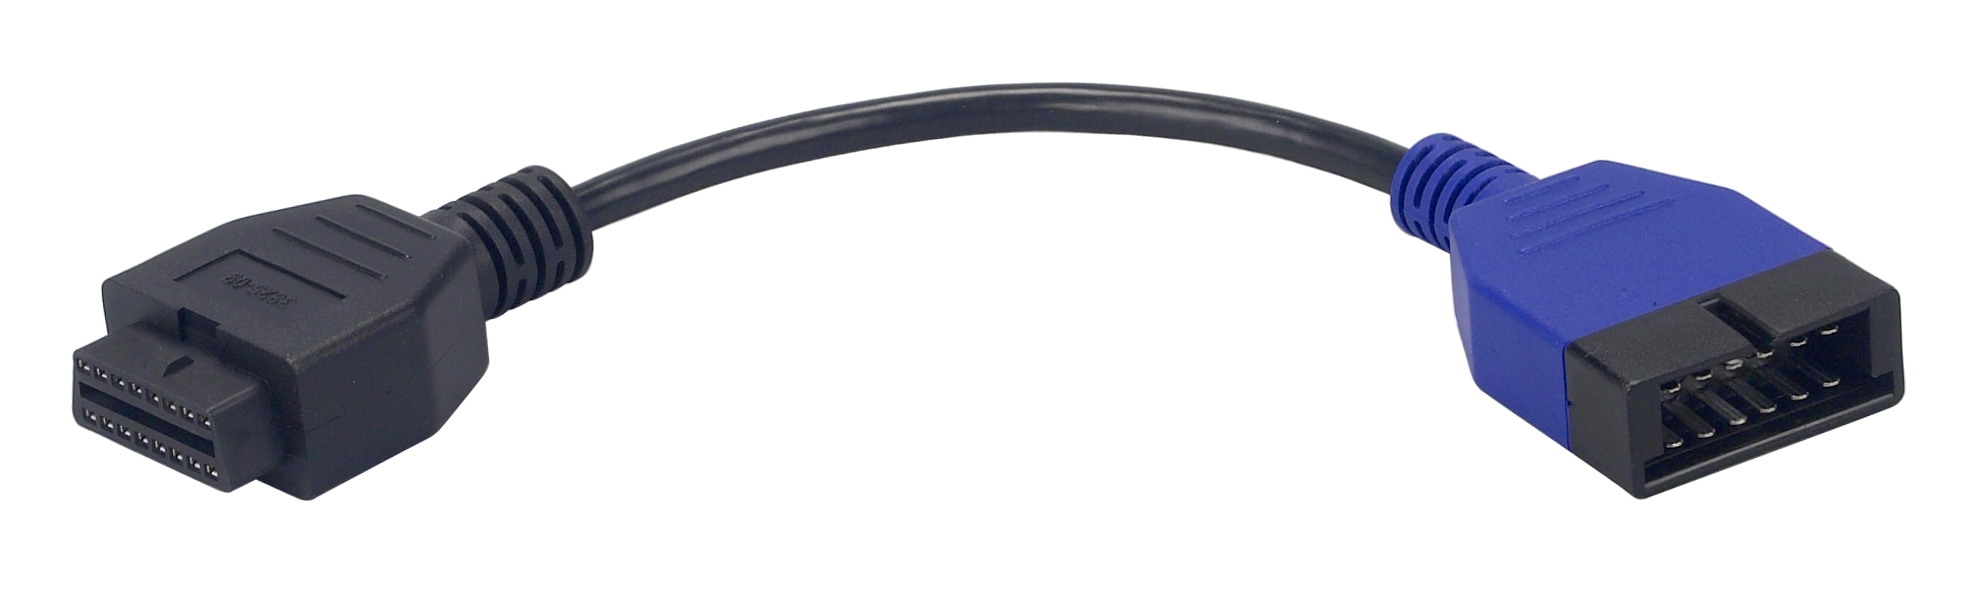 OTC 212633  Vehicle Adapter Cable for GM